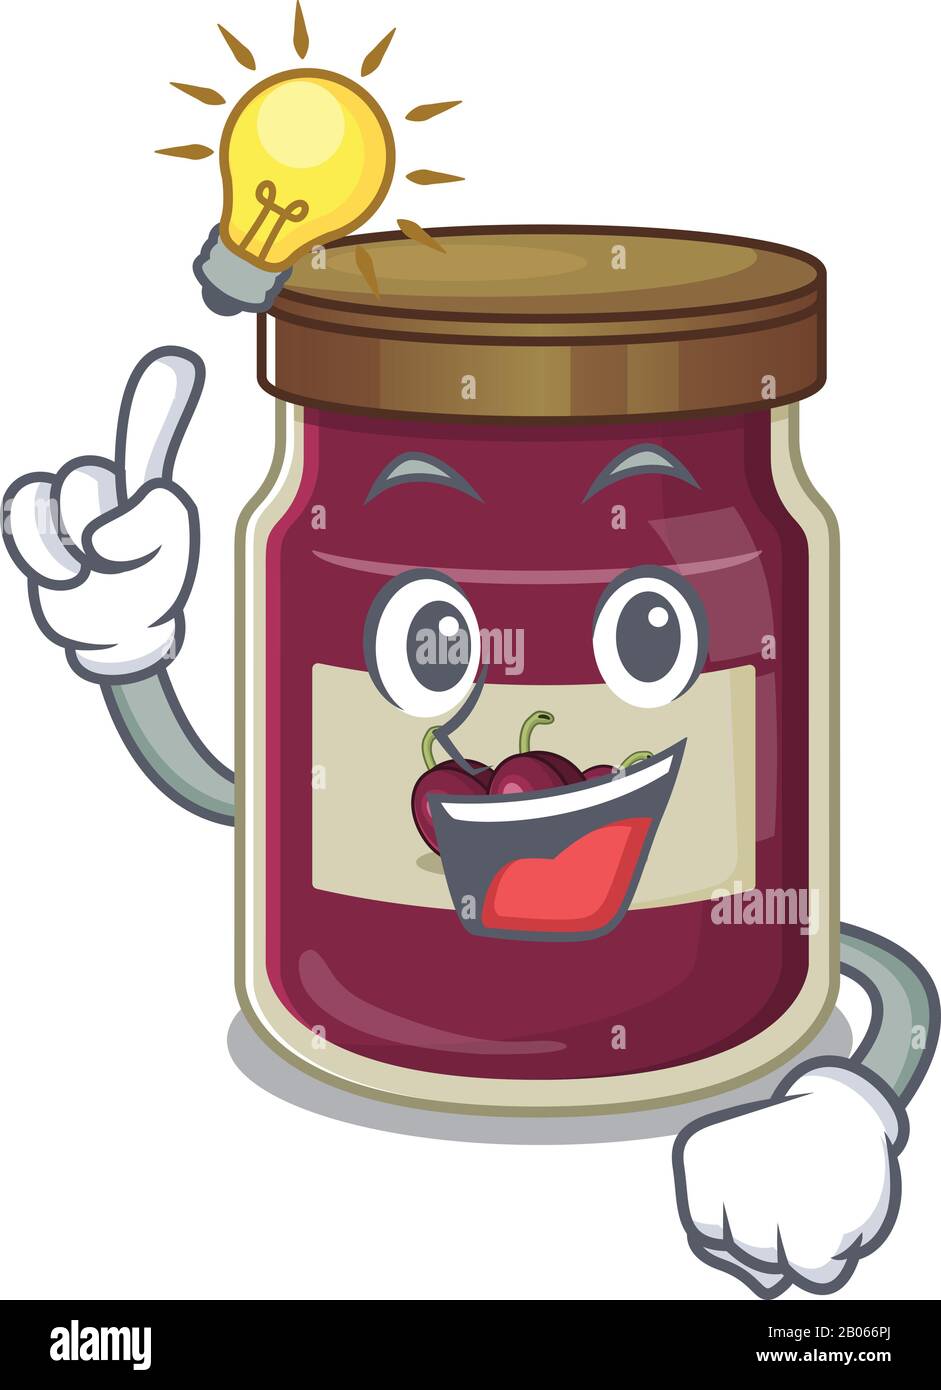 a clever plum jam cartoon character style have an idea gesture Stock Vector